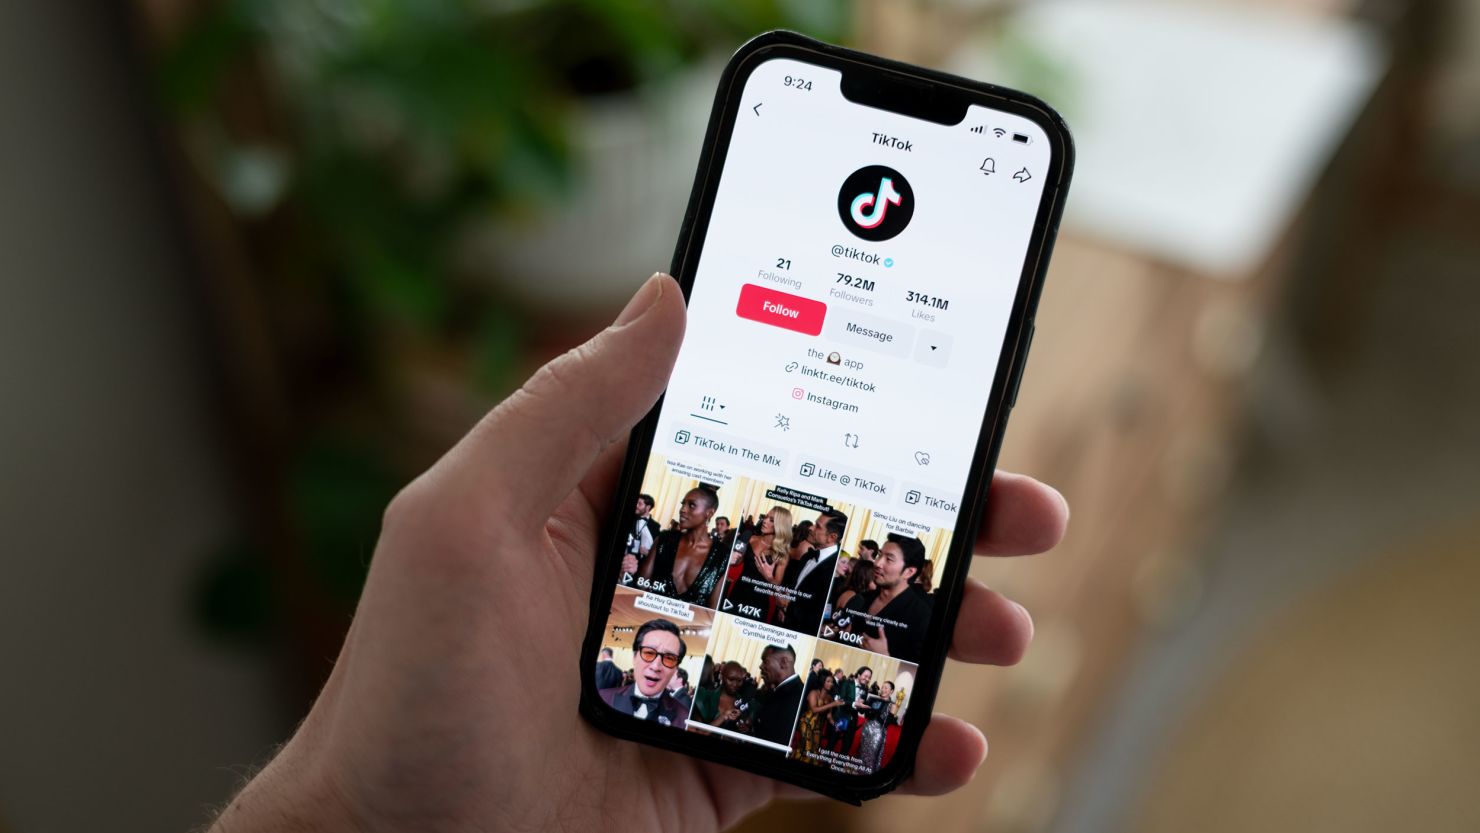 There are few companies that could afford to buy TikTok outright.